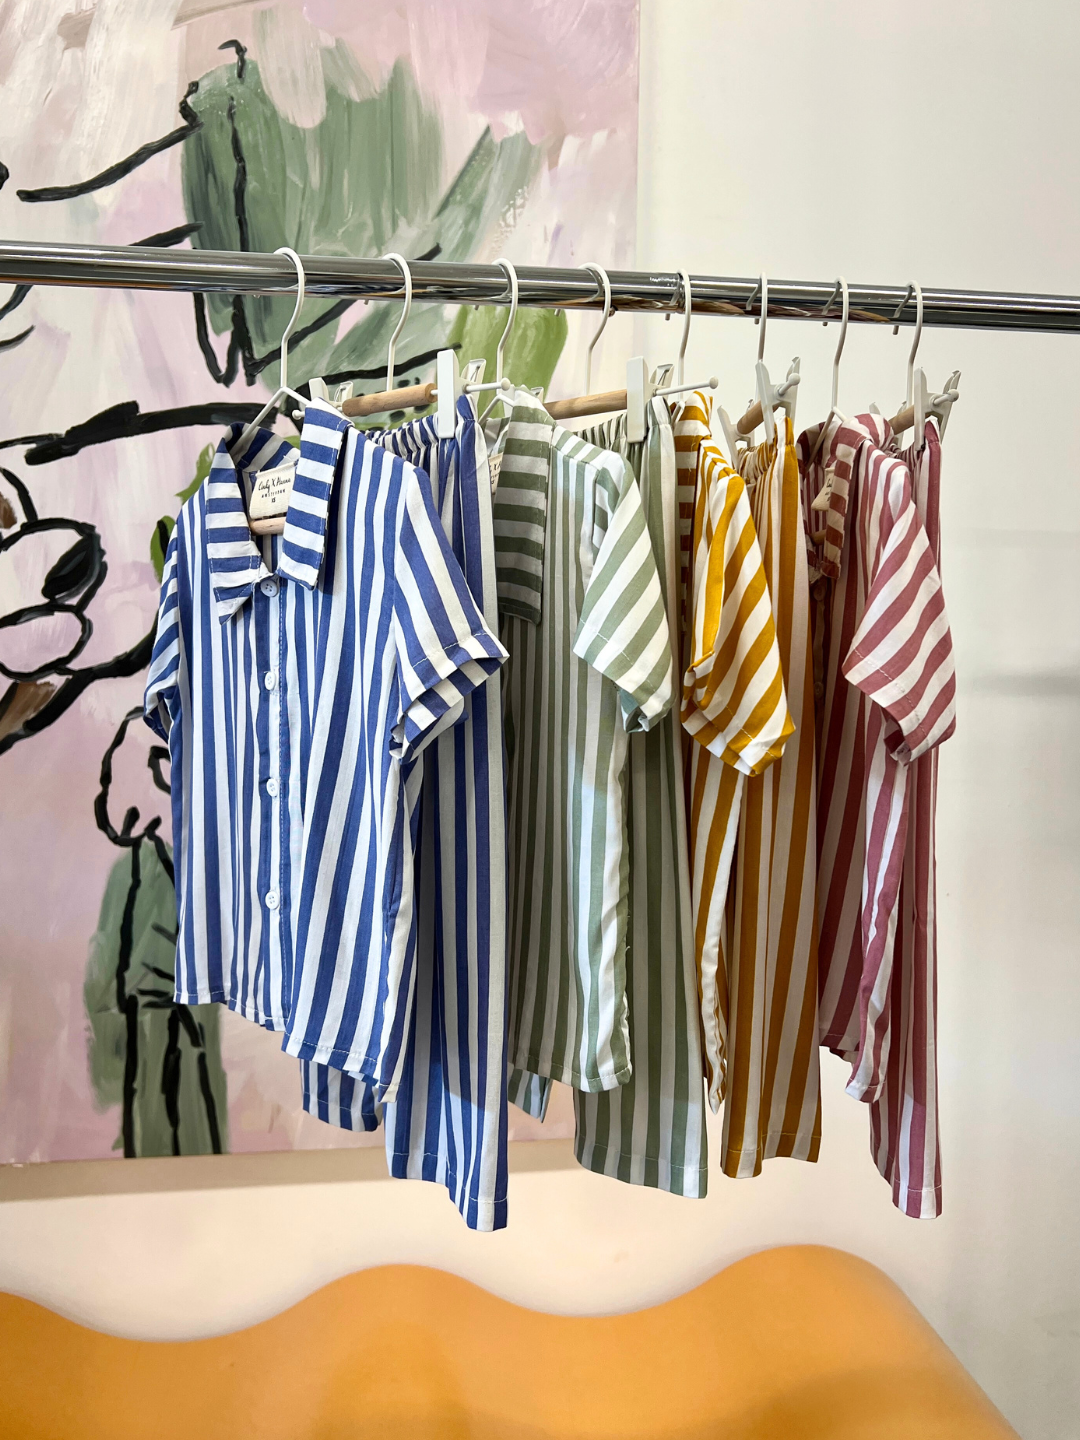 Yellow Stripe | All colors of the kid's Michi Pajamas hanging on the rack